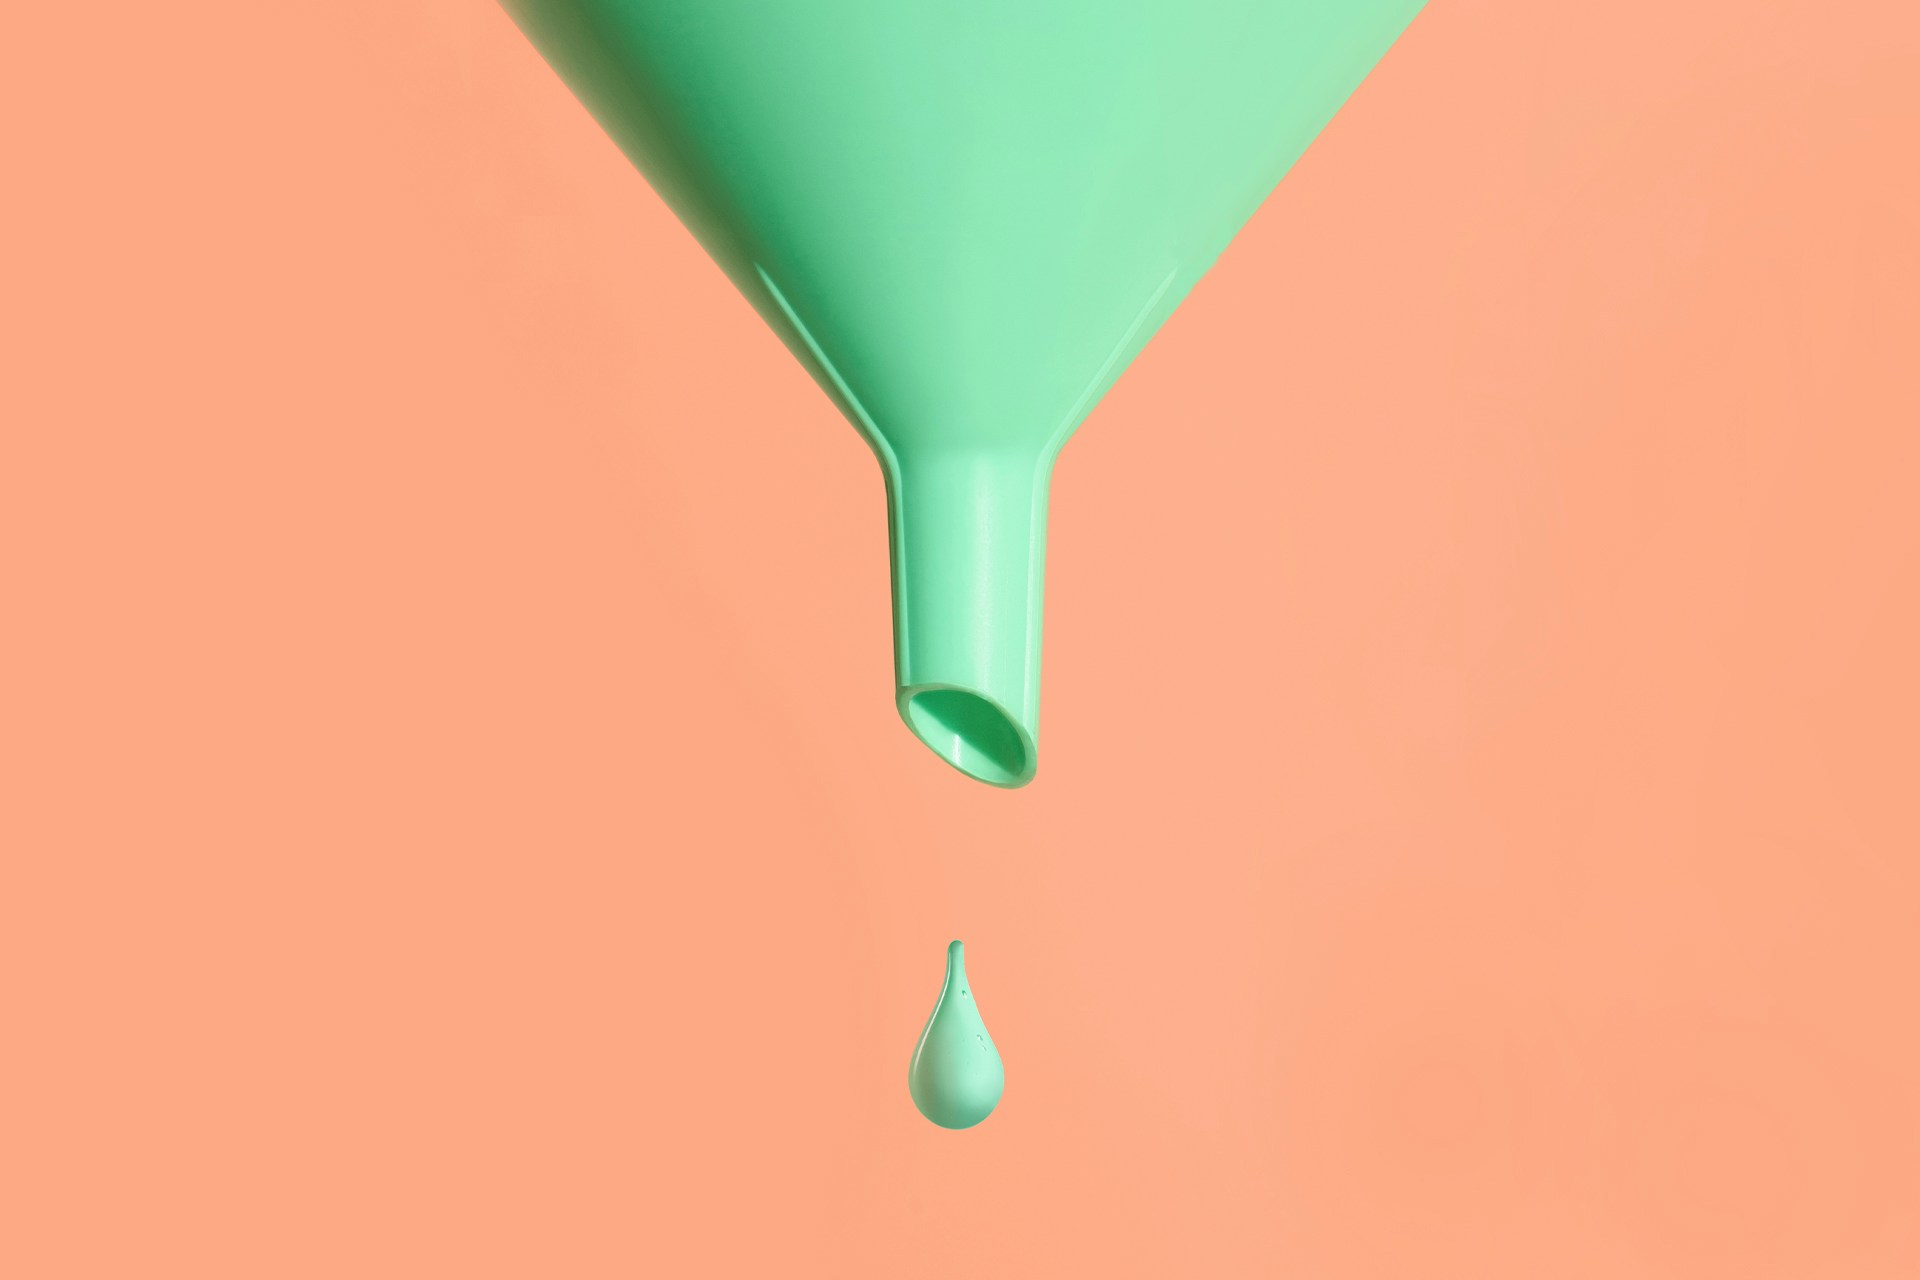 This blog on leveraging the marketing funnel explains how marketing teams can use various marketing tactics to bring people into their funnel and move them through the journey to the point of purchase. This image of a light green funnel with a drop of liquid falling from the end of it visually describes that customer journey. 